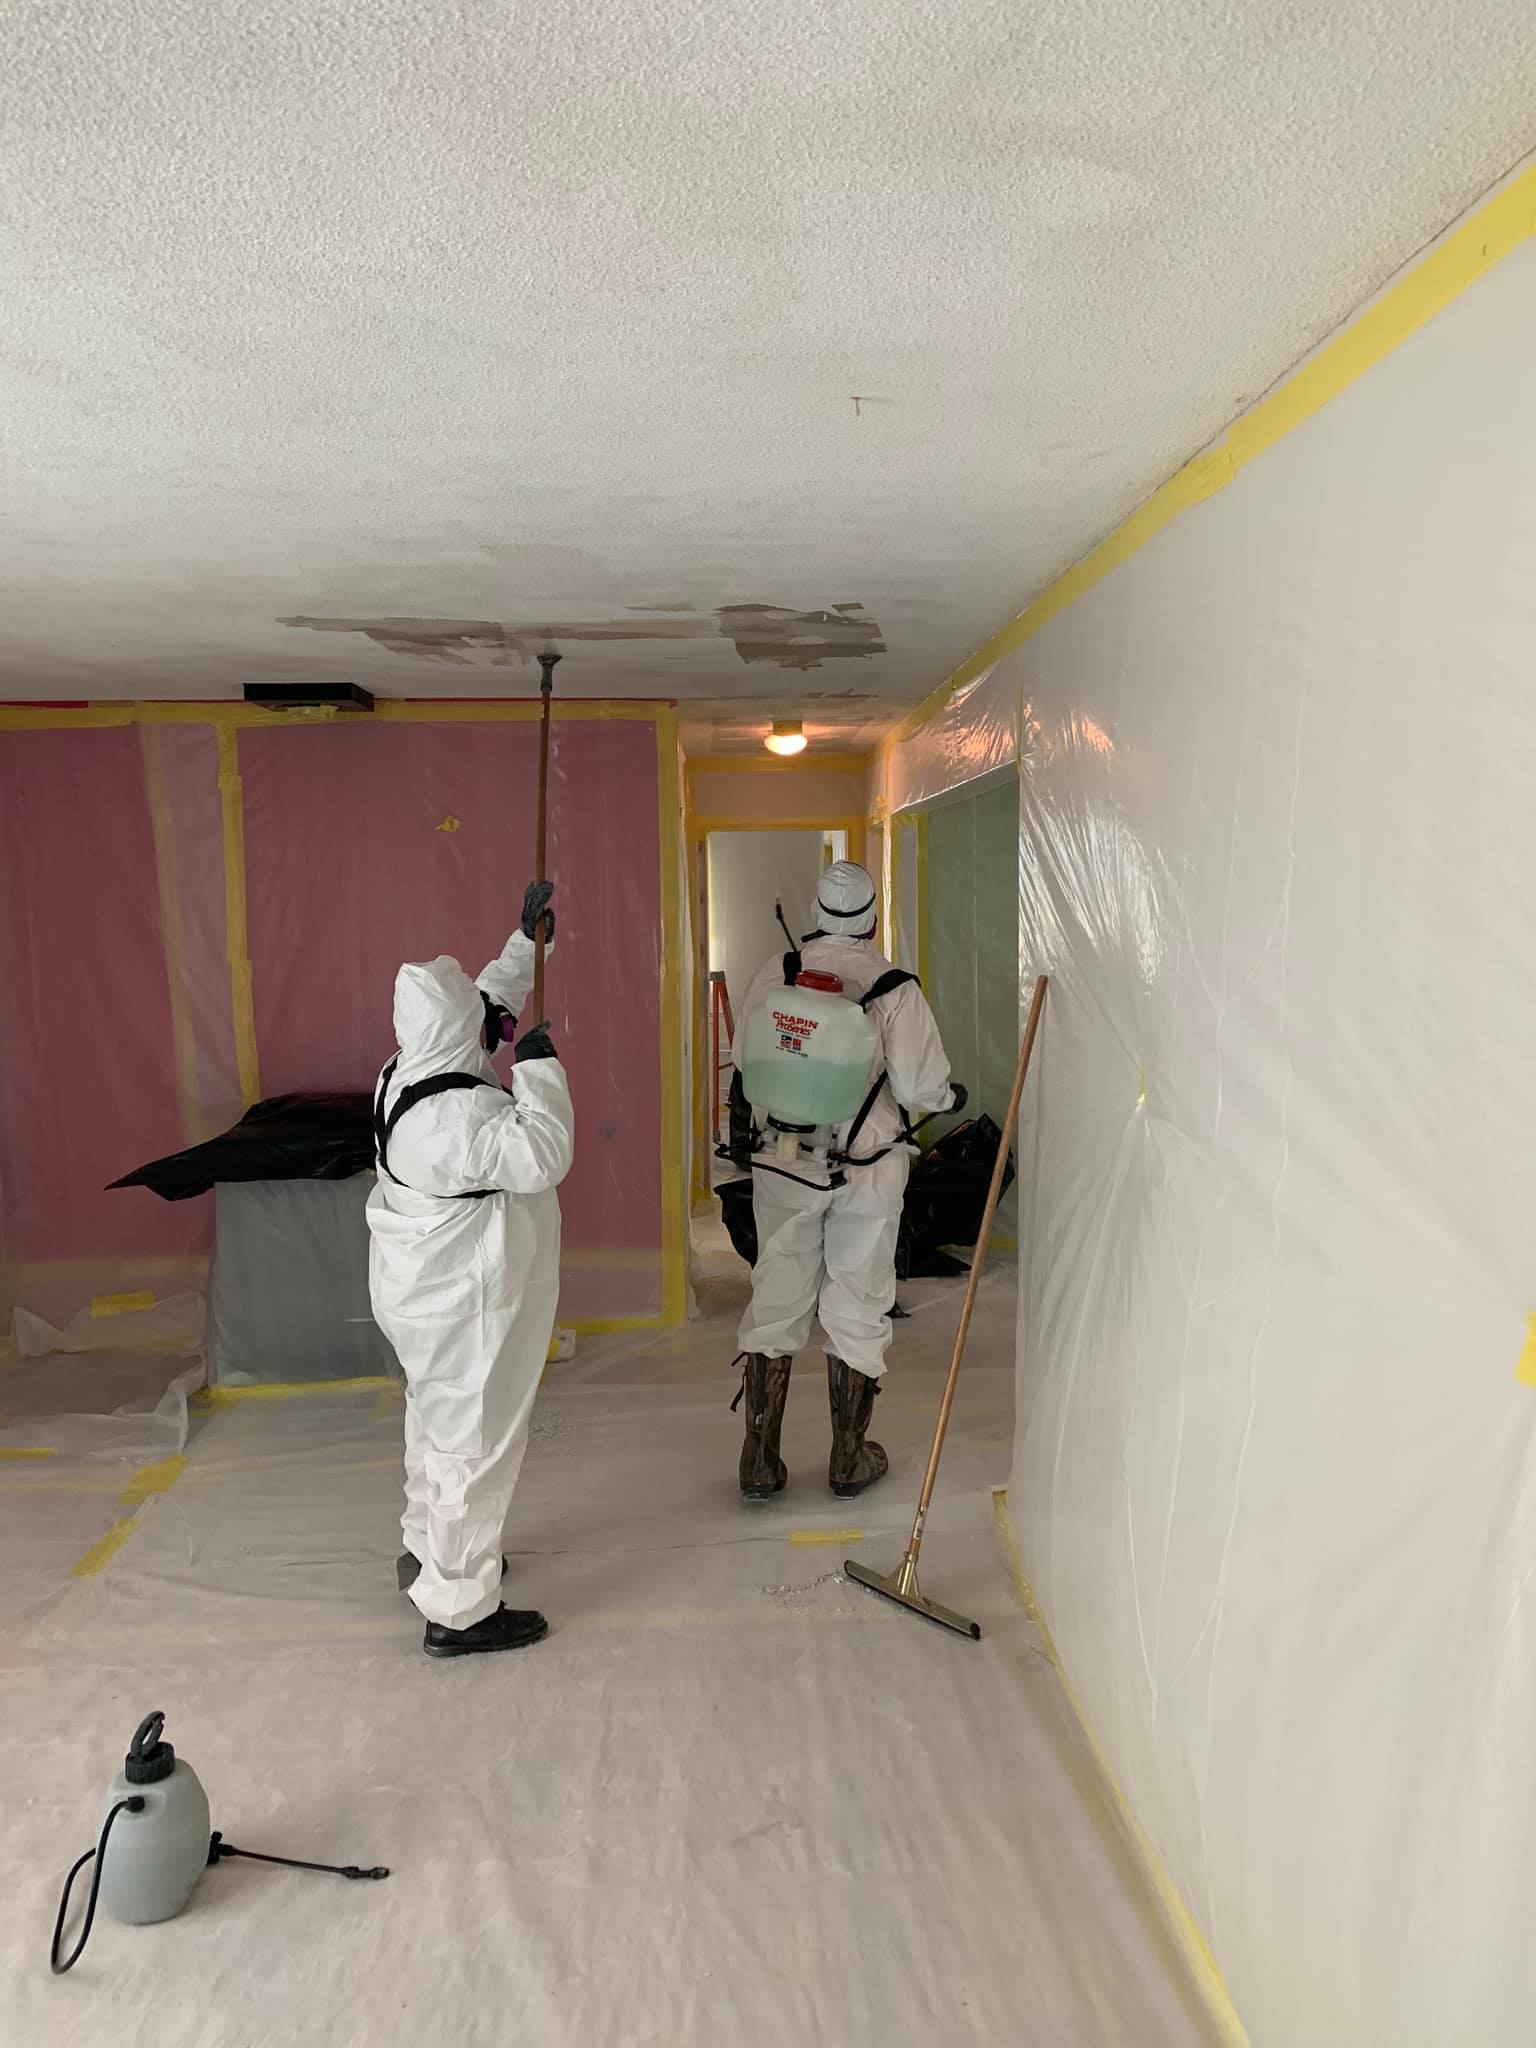 Scrapping asbestos-containing popcorn ceiling